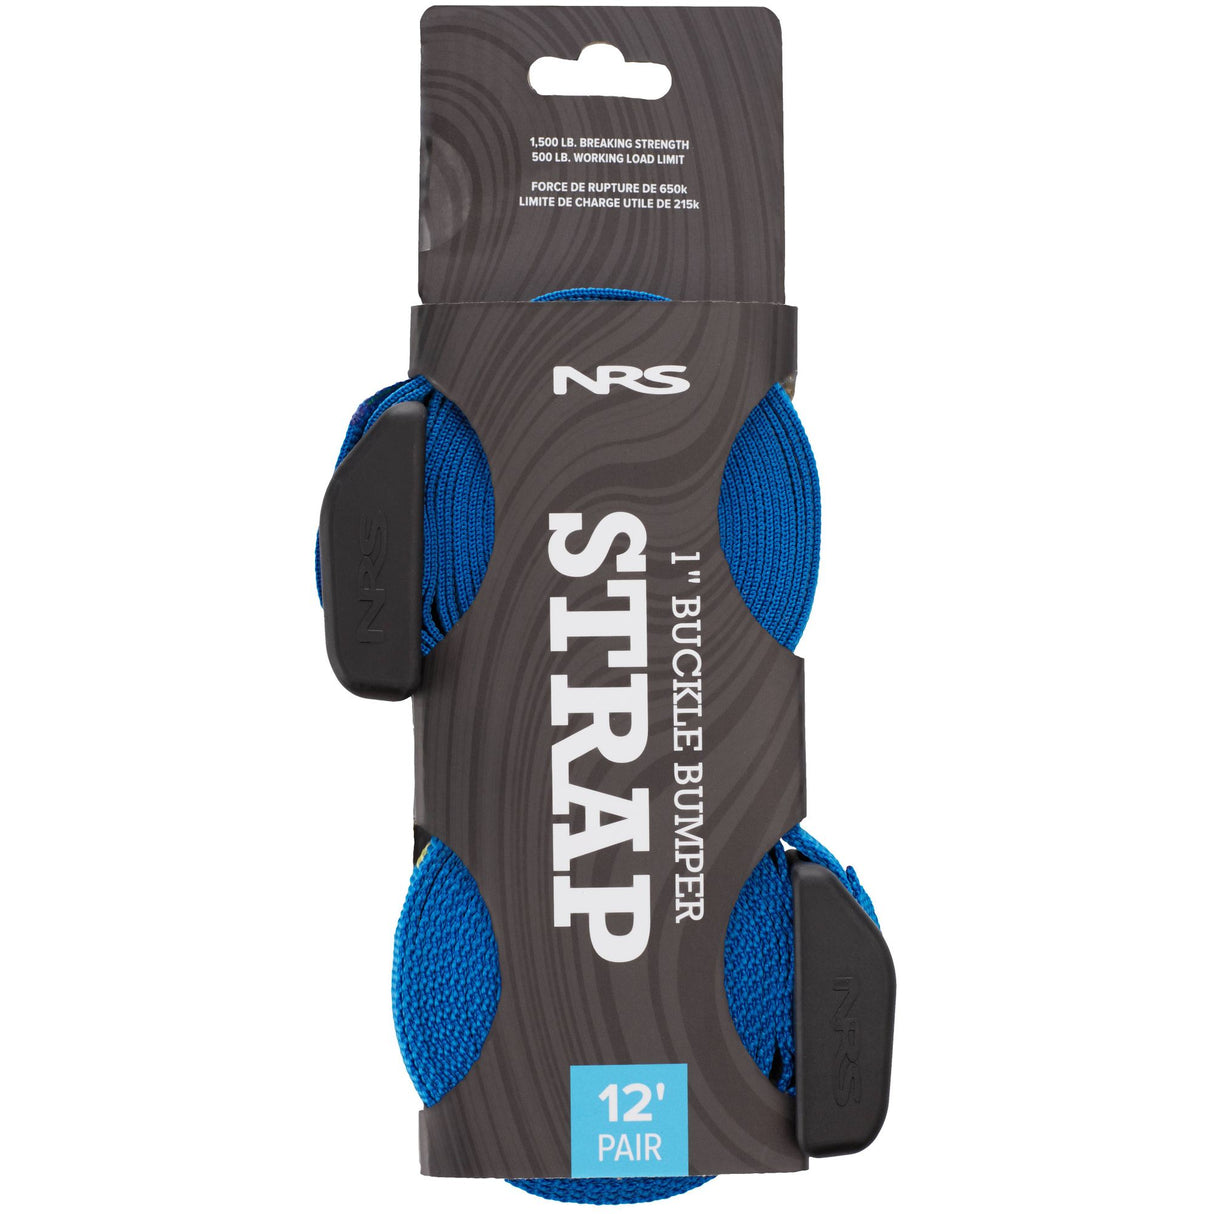 NRS Buckle Bumper Straps Iconic Blue 12'